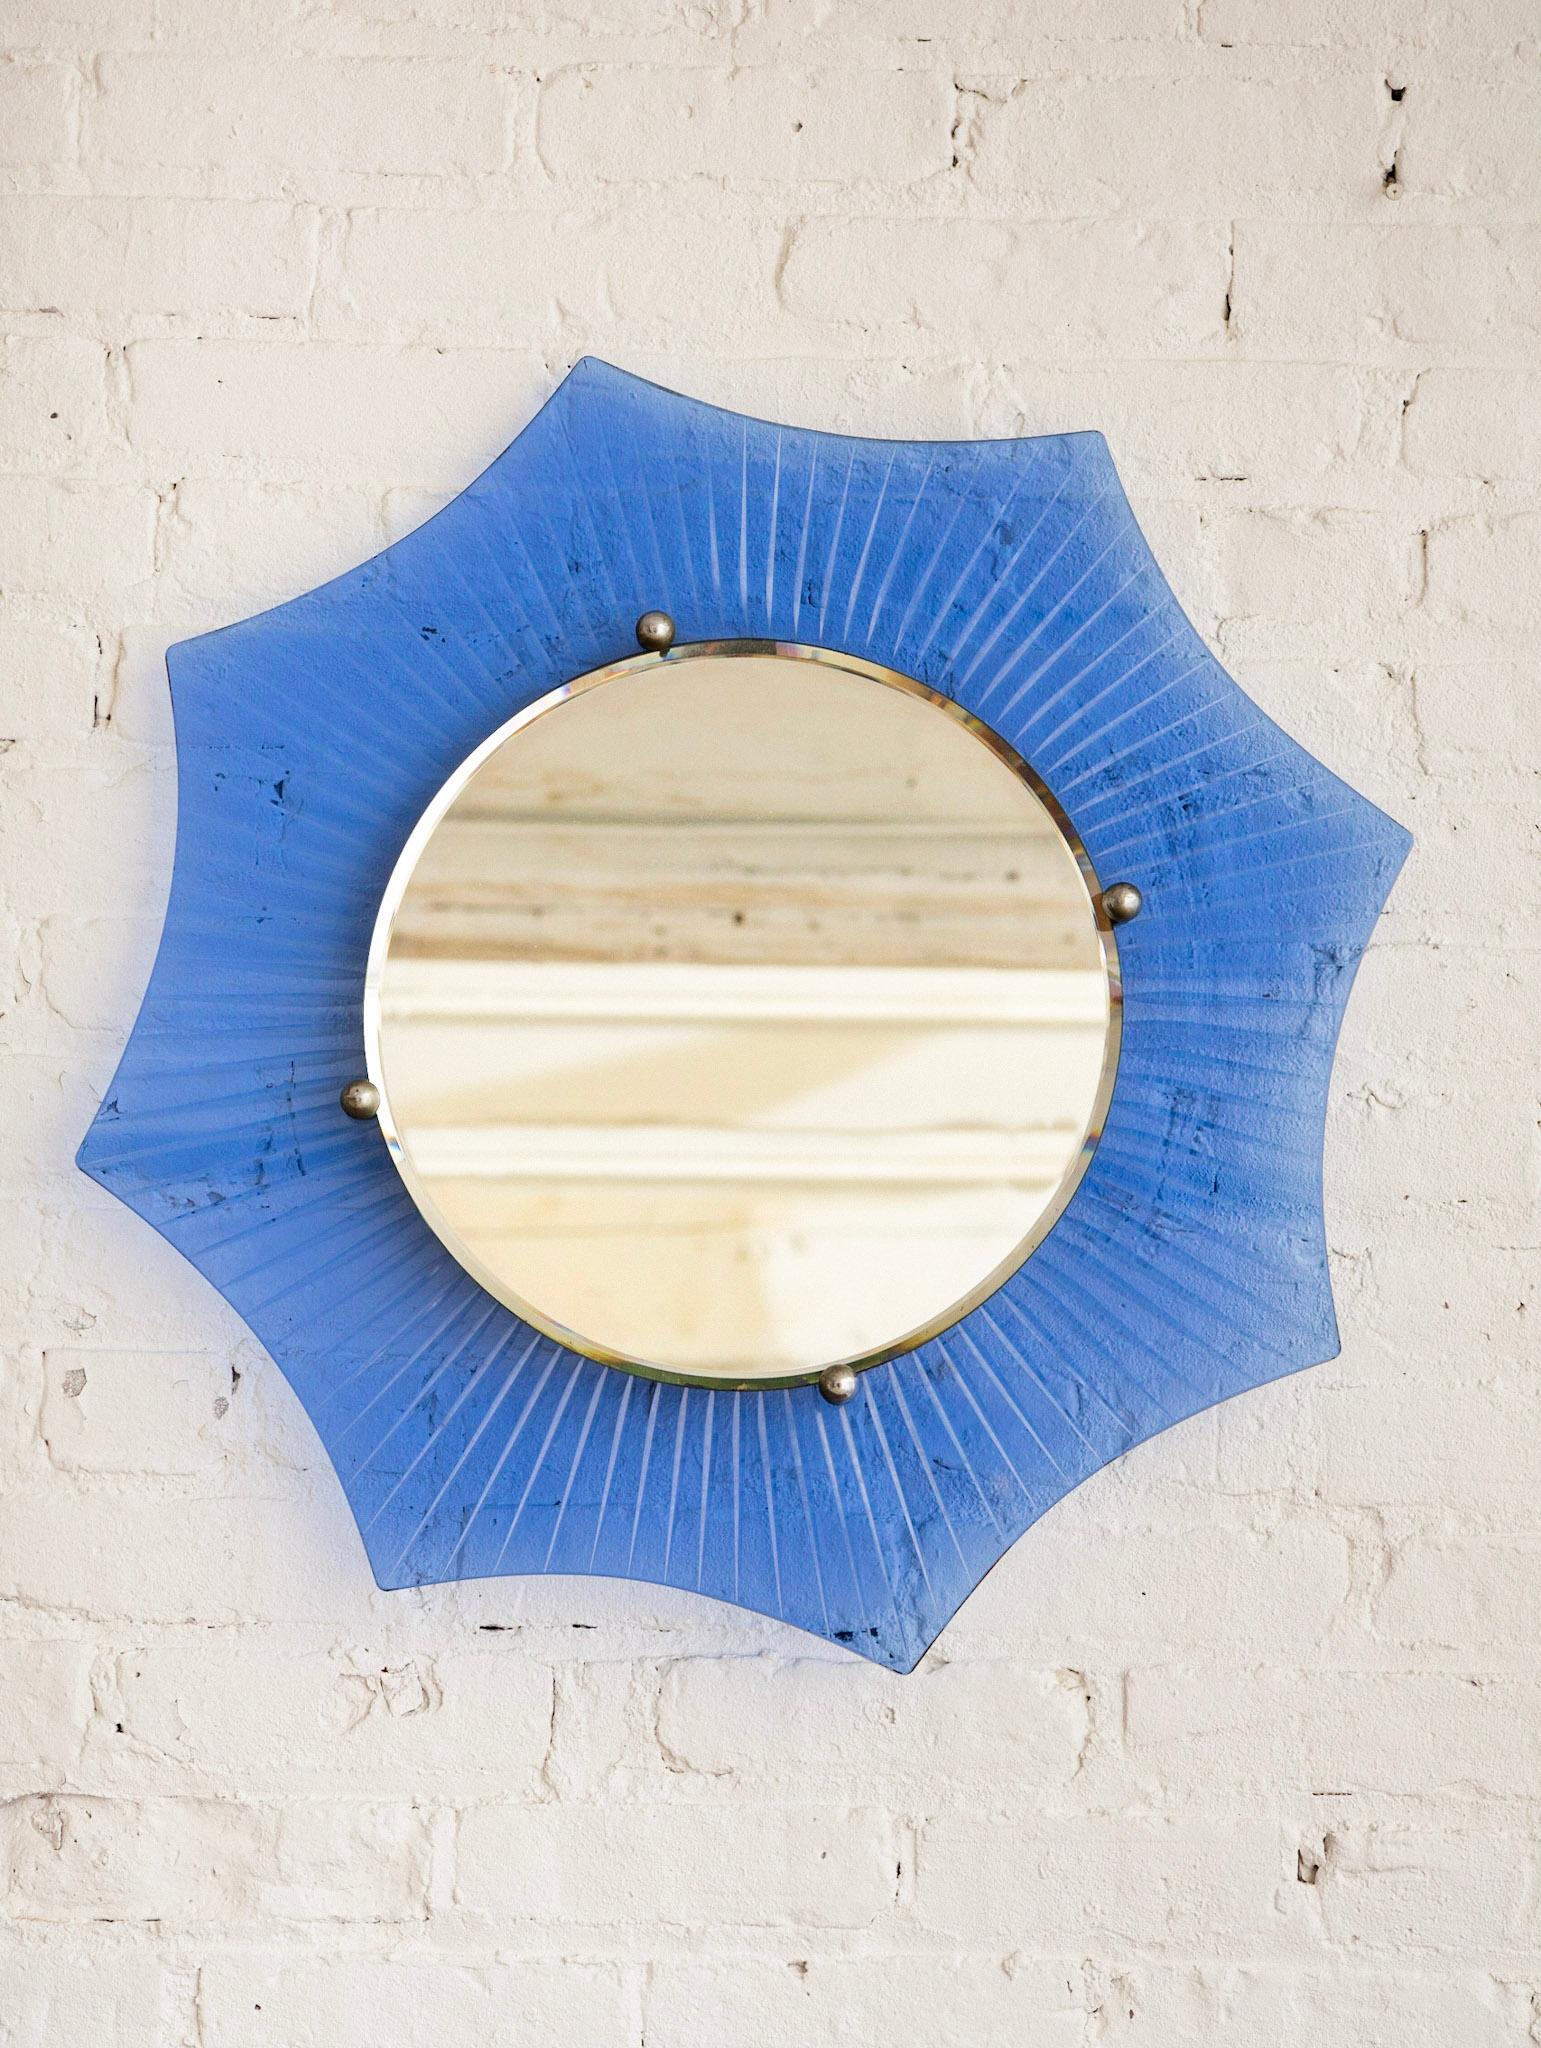 Art Deco starburst form mirror. Outer scalloped edge cobalt glass etched with a starburst pattern. Inner beveled mirror held in place with round chrome caps.